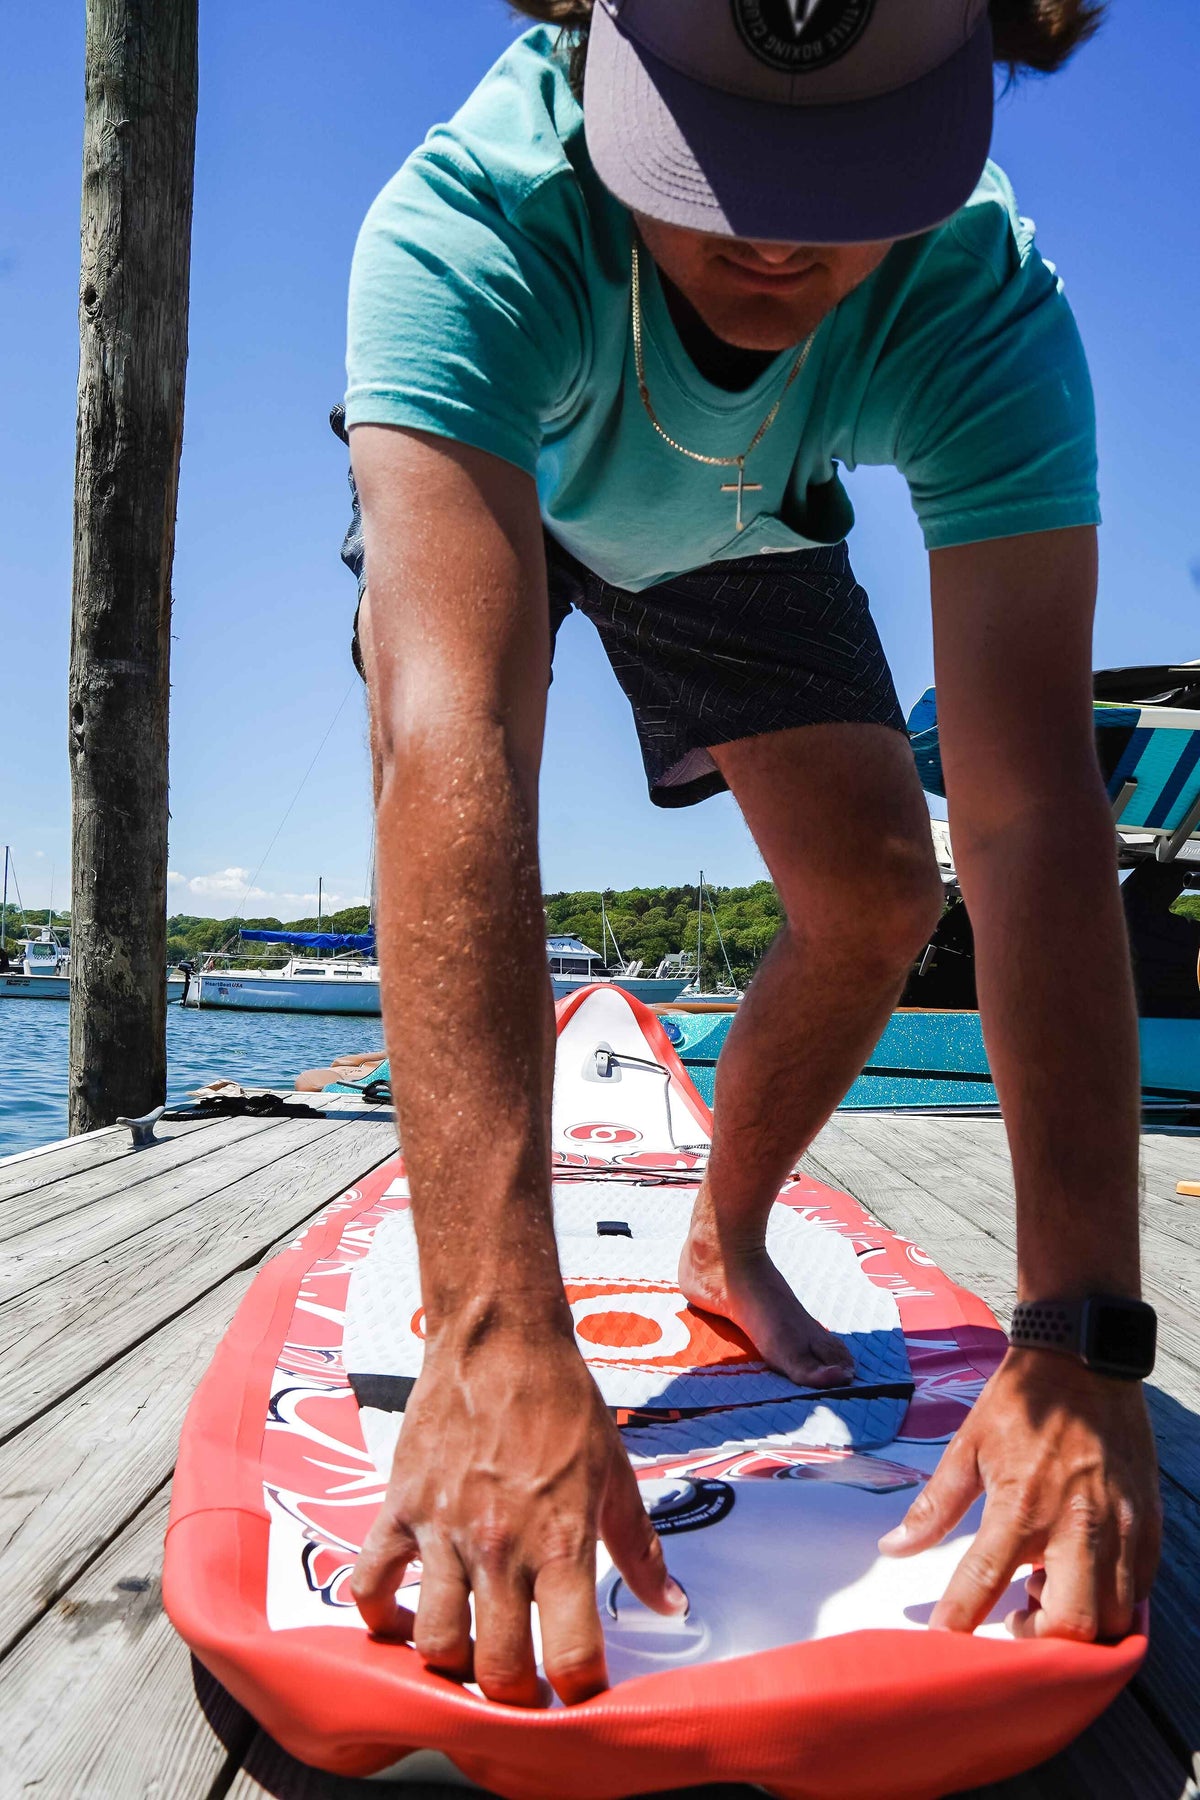 Easily unravel paddleboard to prepare for inflation